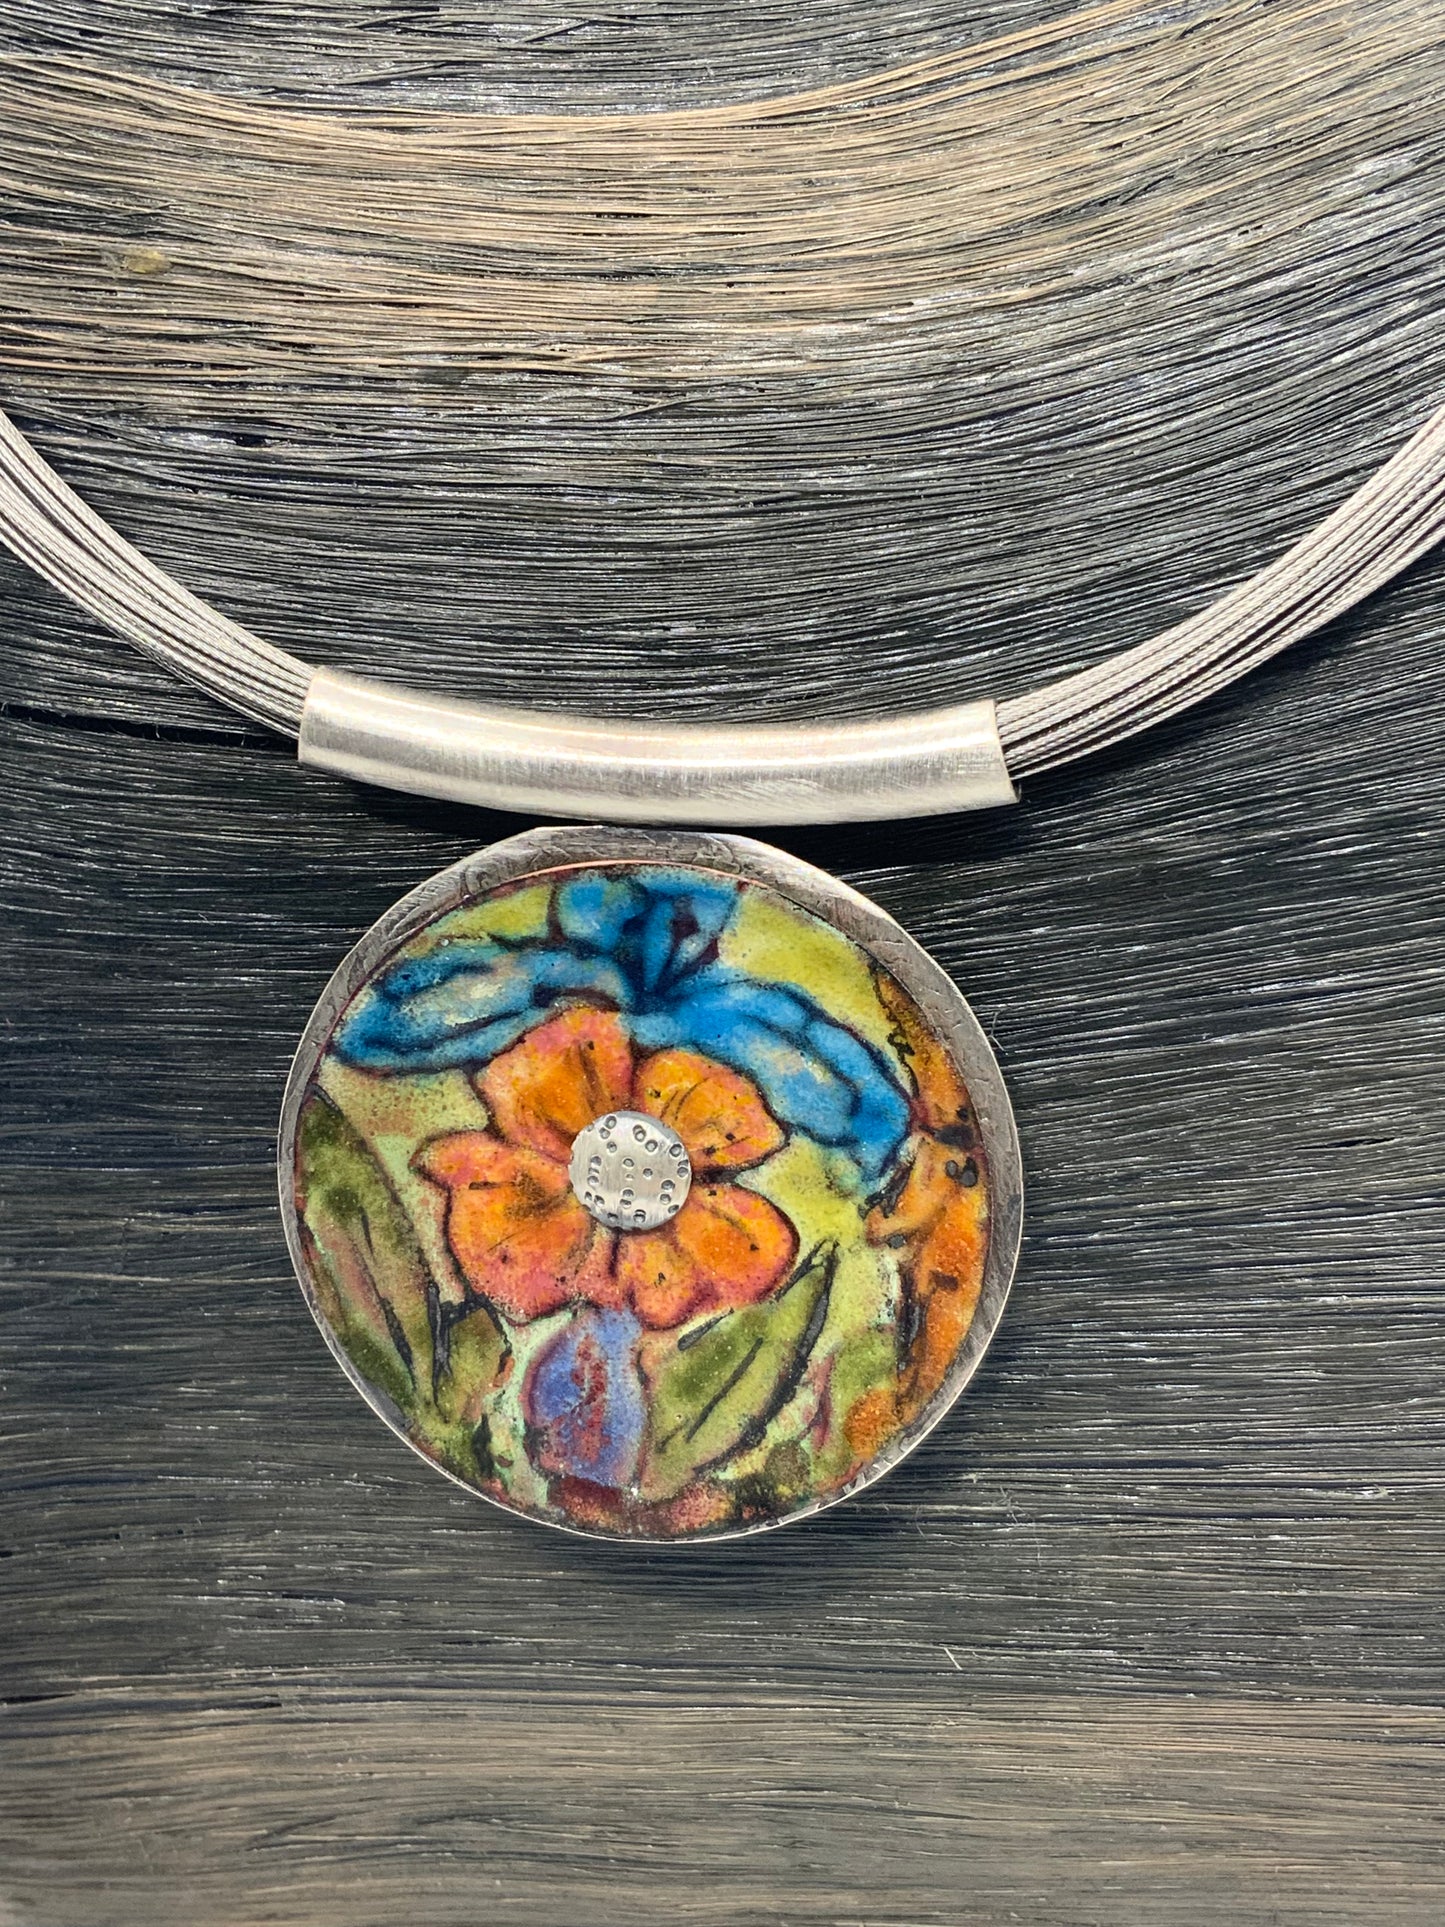 Sterling Silver and Enamel Round 50 Strand Necklace with Flower